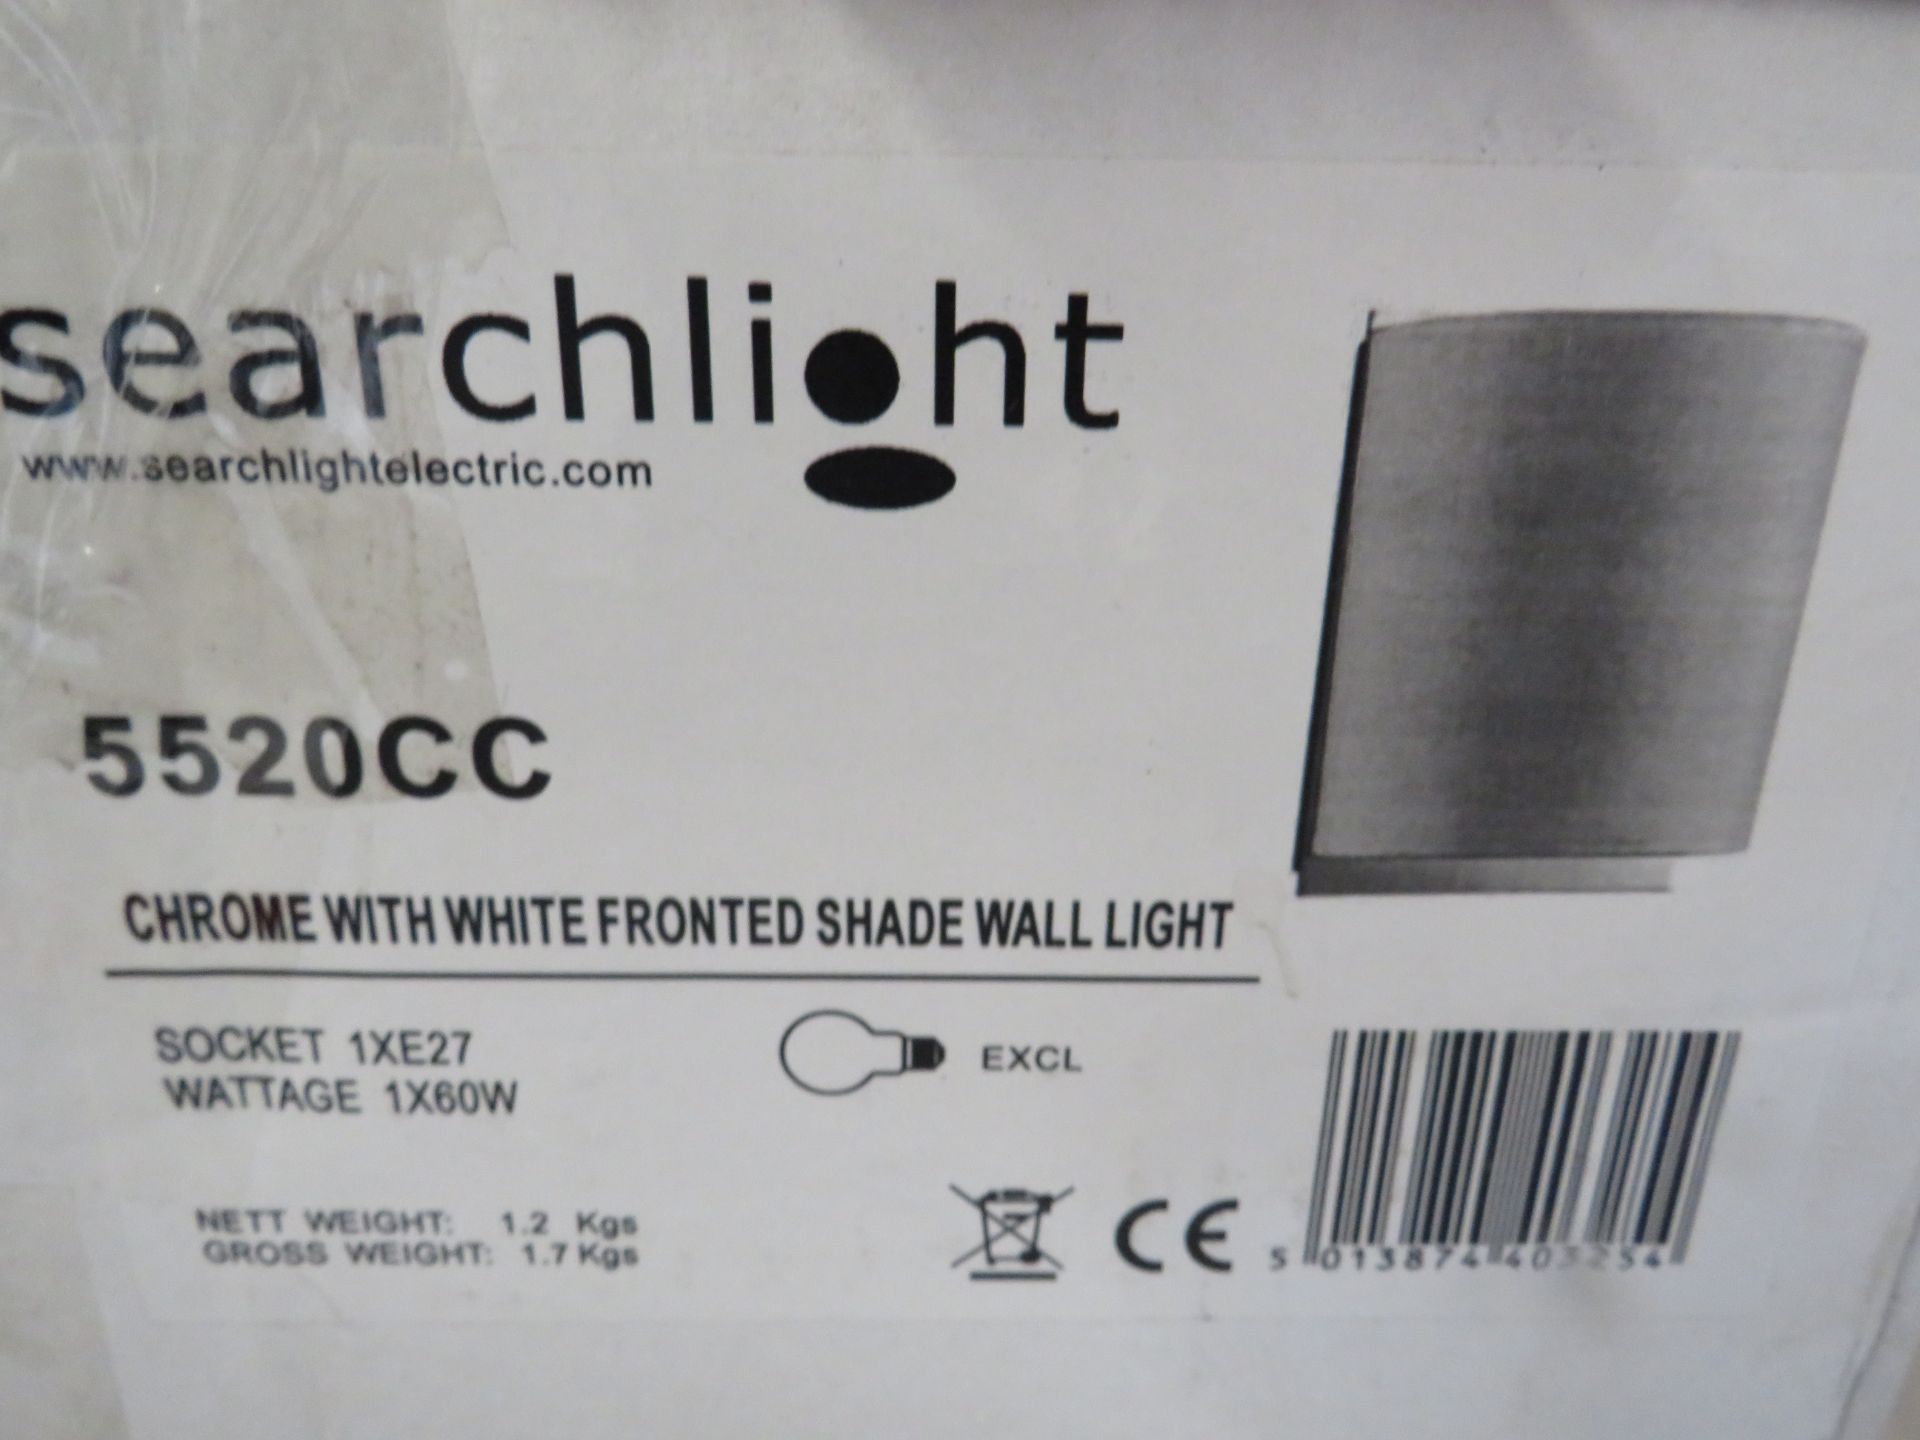 Searchlight 5520CC Wall Lights Chrome Wall Light RRP “?33.00 - This lot contains unsorted raw